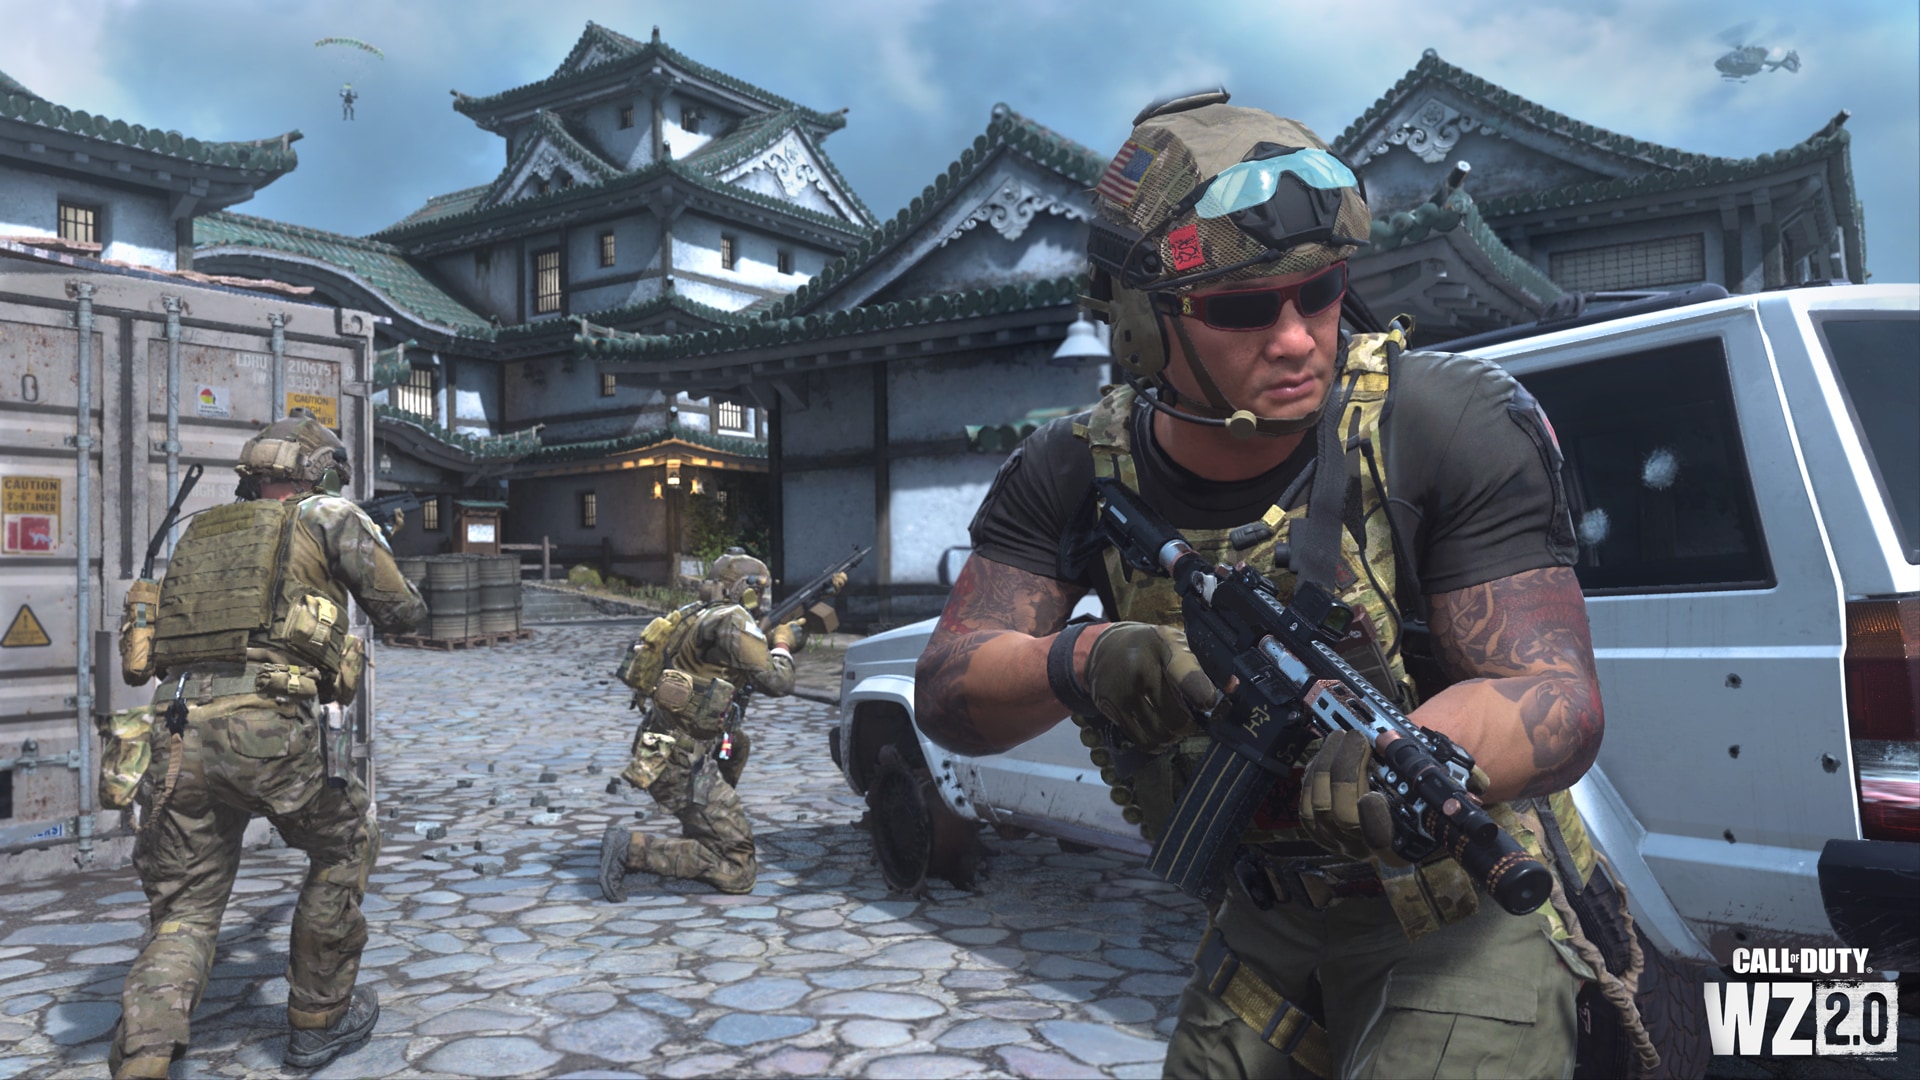 Call of Duty Warzone 2.0 has taken the battle royale crown on